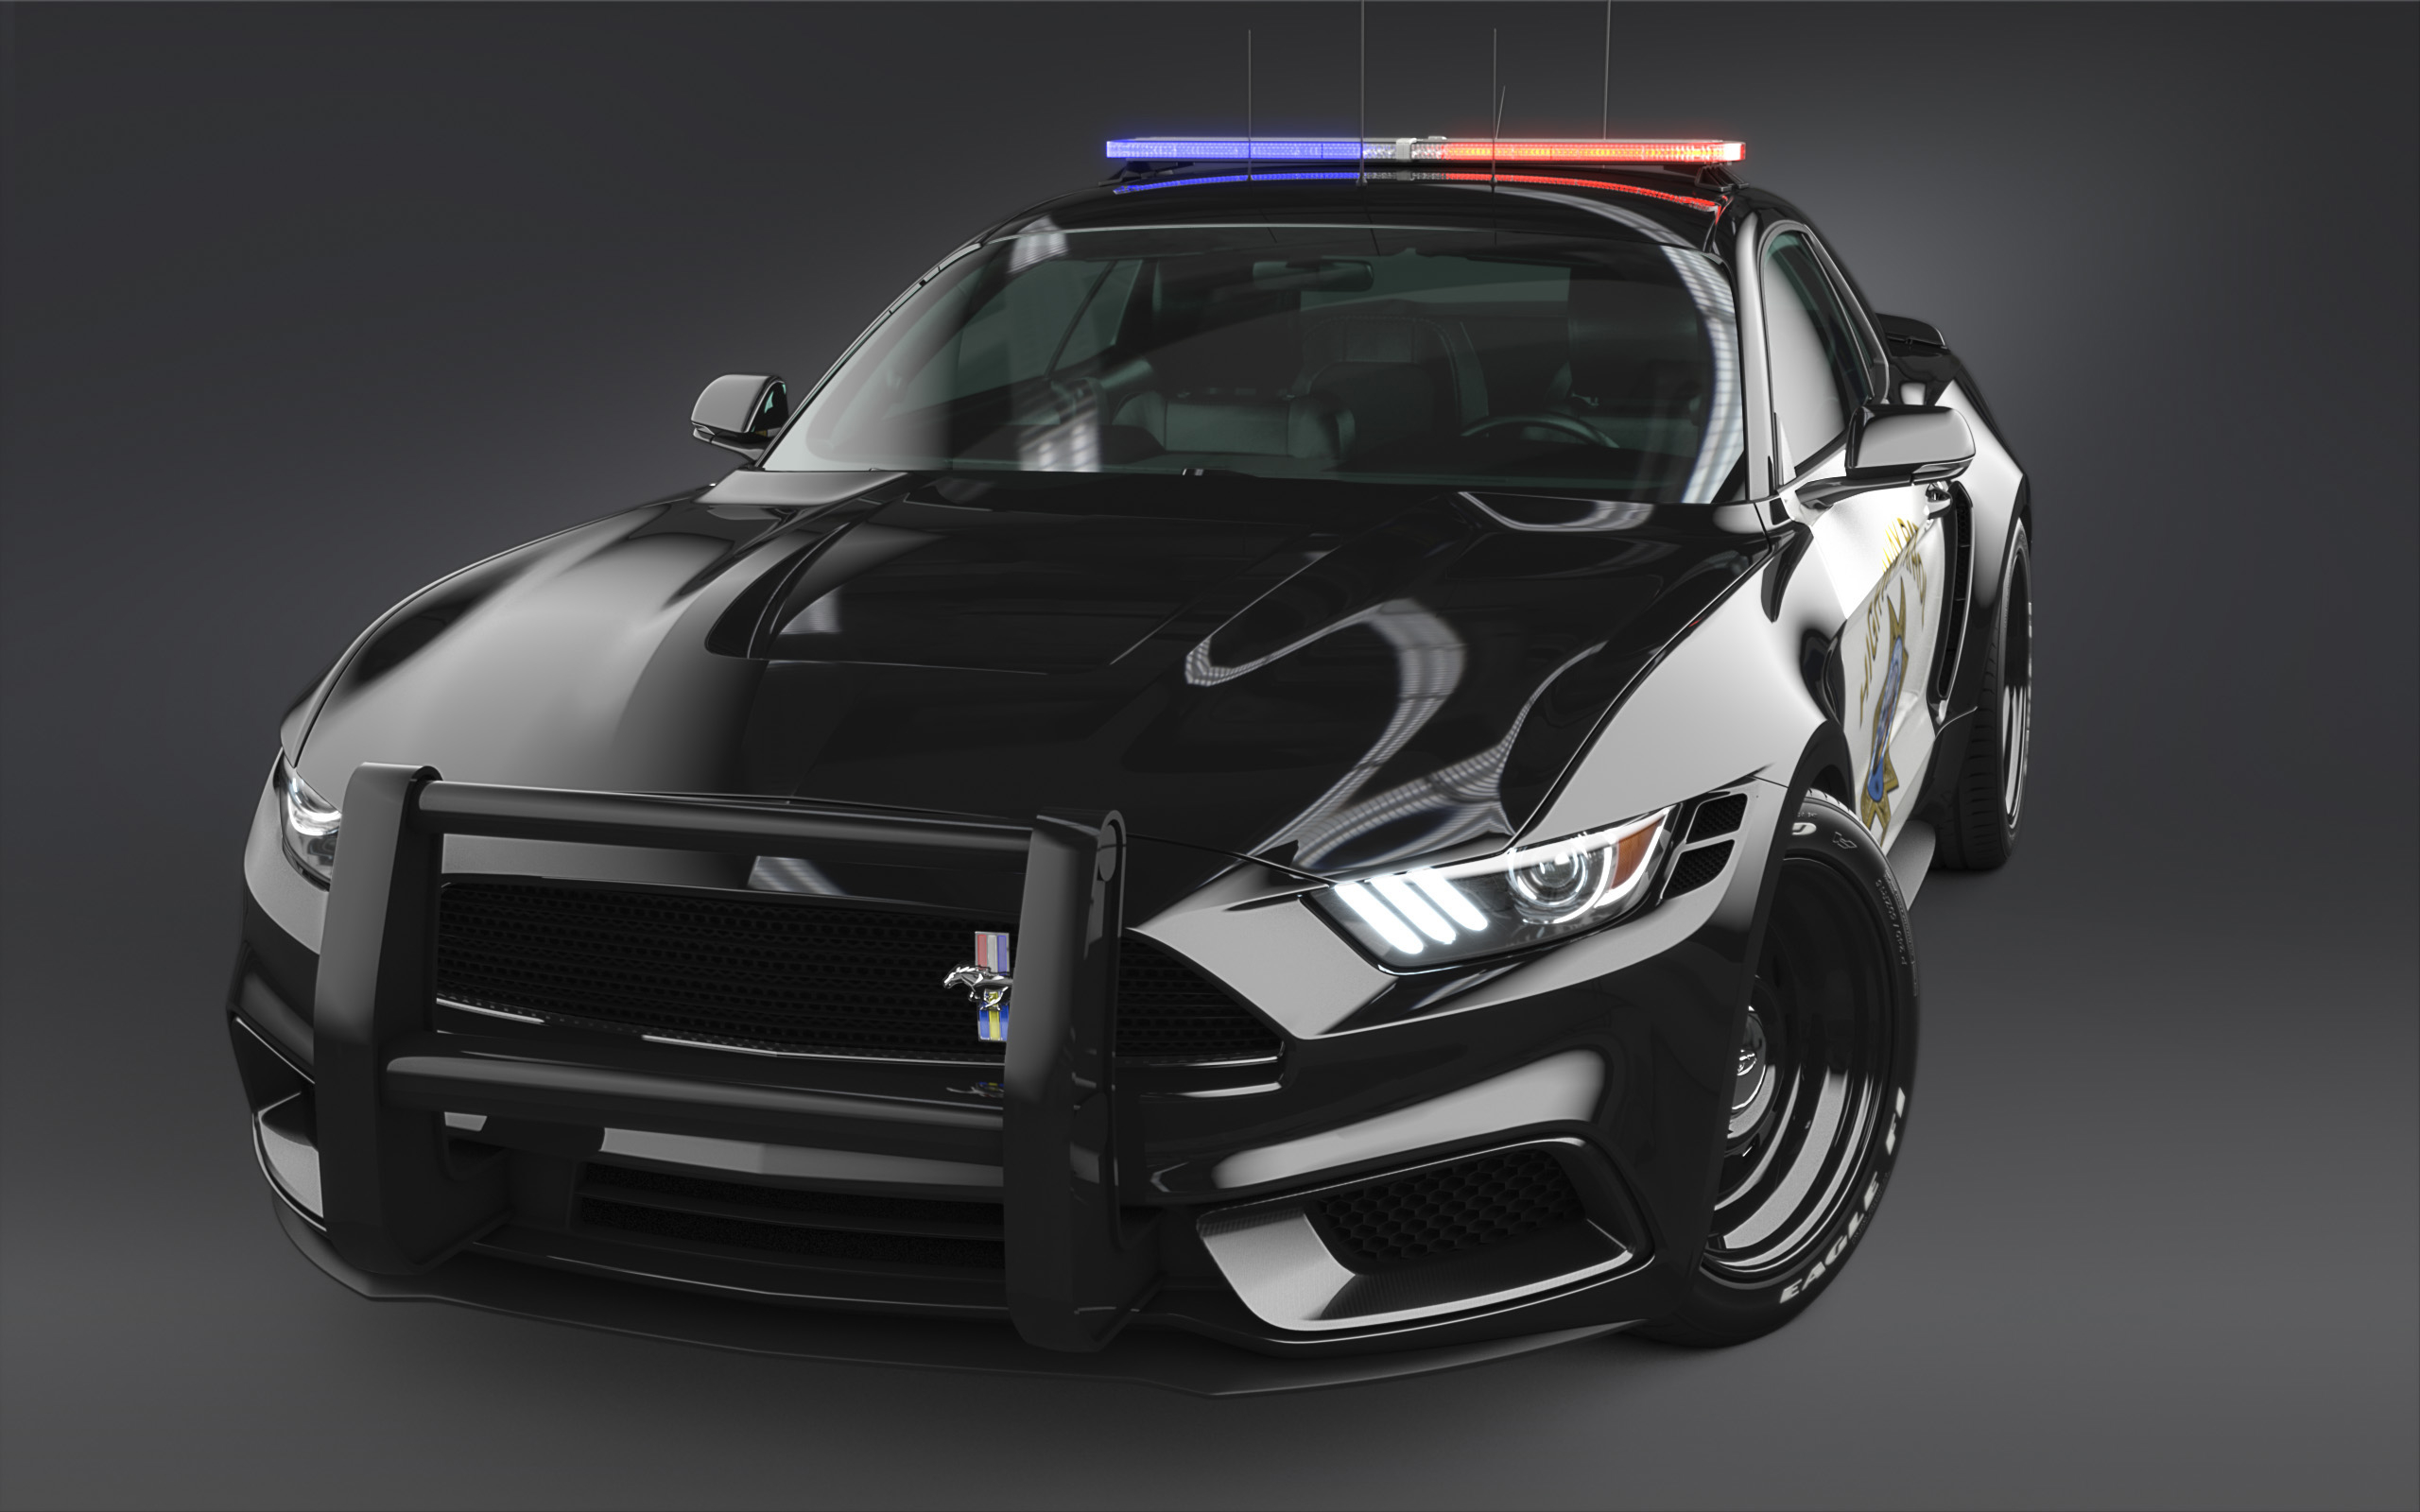 2560x1600 20+ Police Car HD Wallpapers and Backgrounds